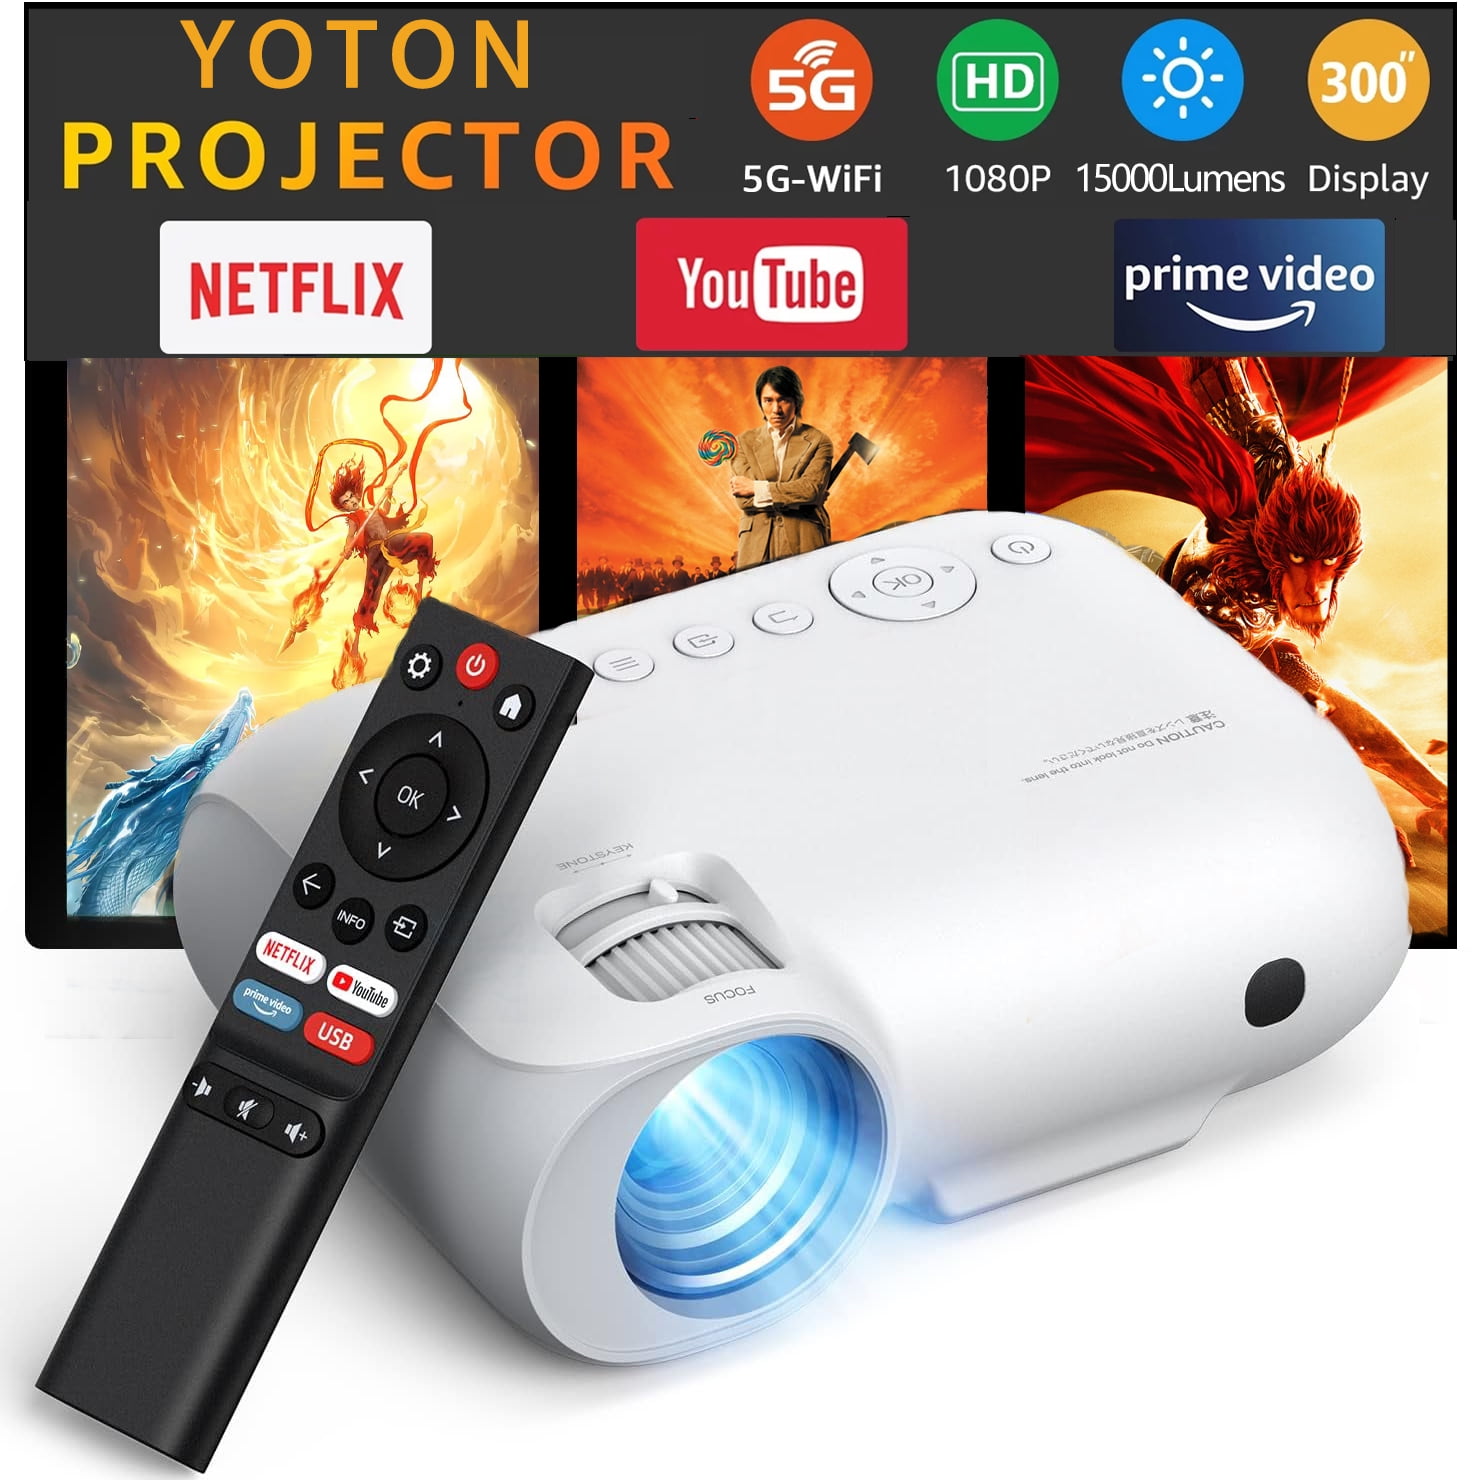 Live - Is It Really Good? Yoton Y9 Smart Projector REVIEW